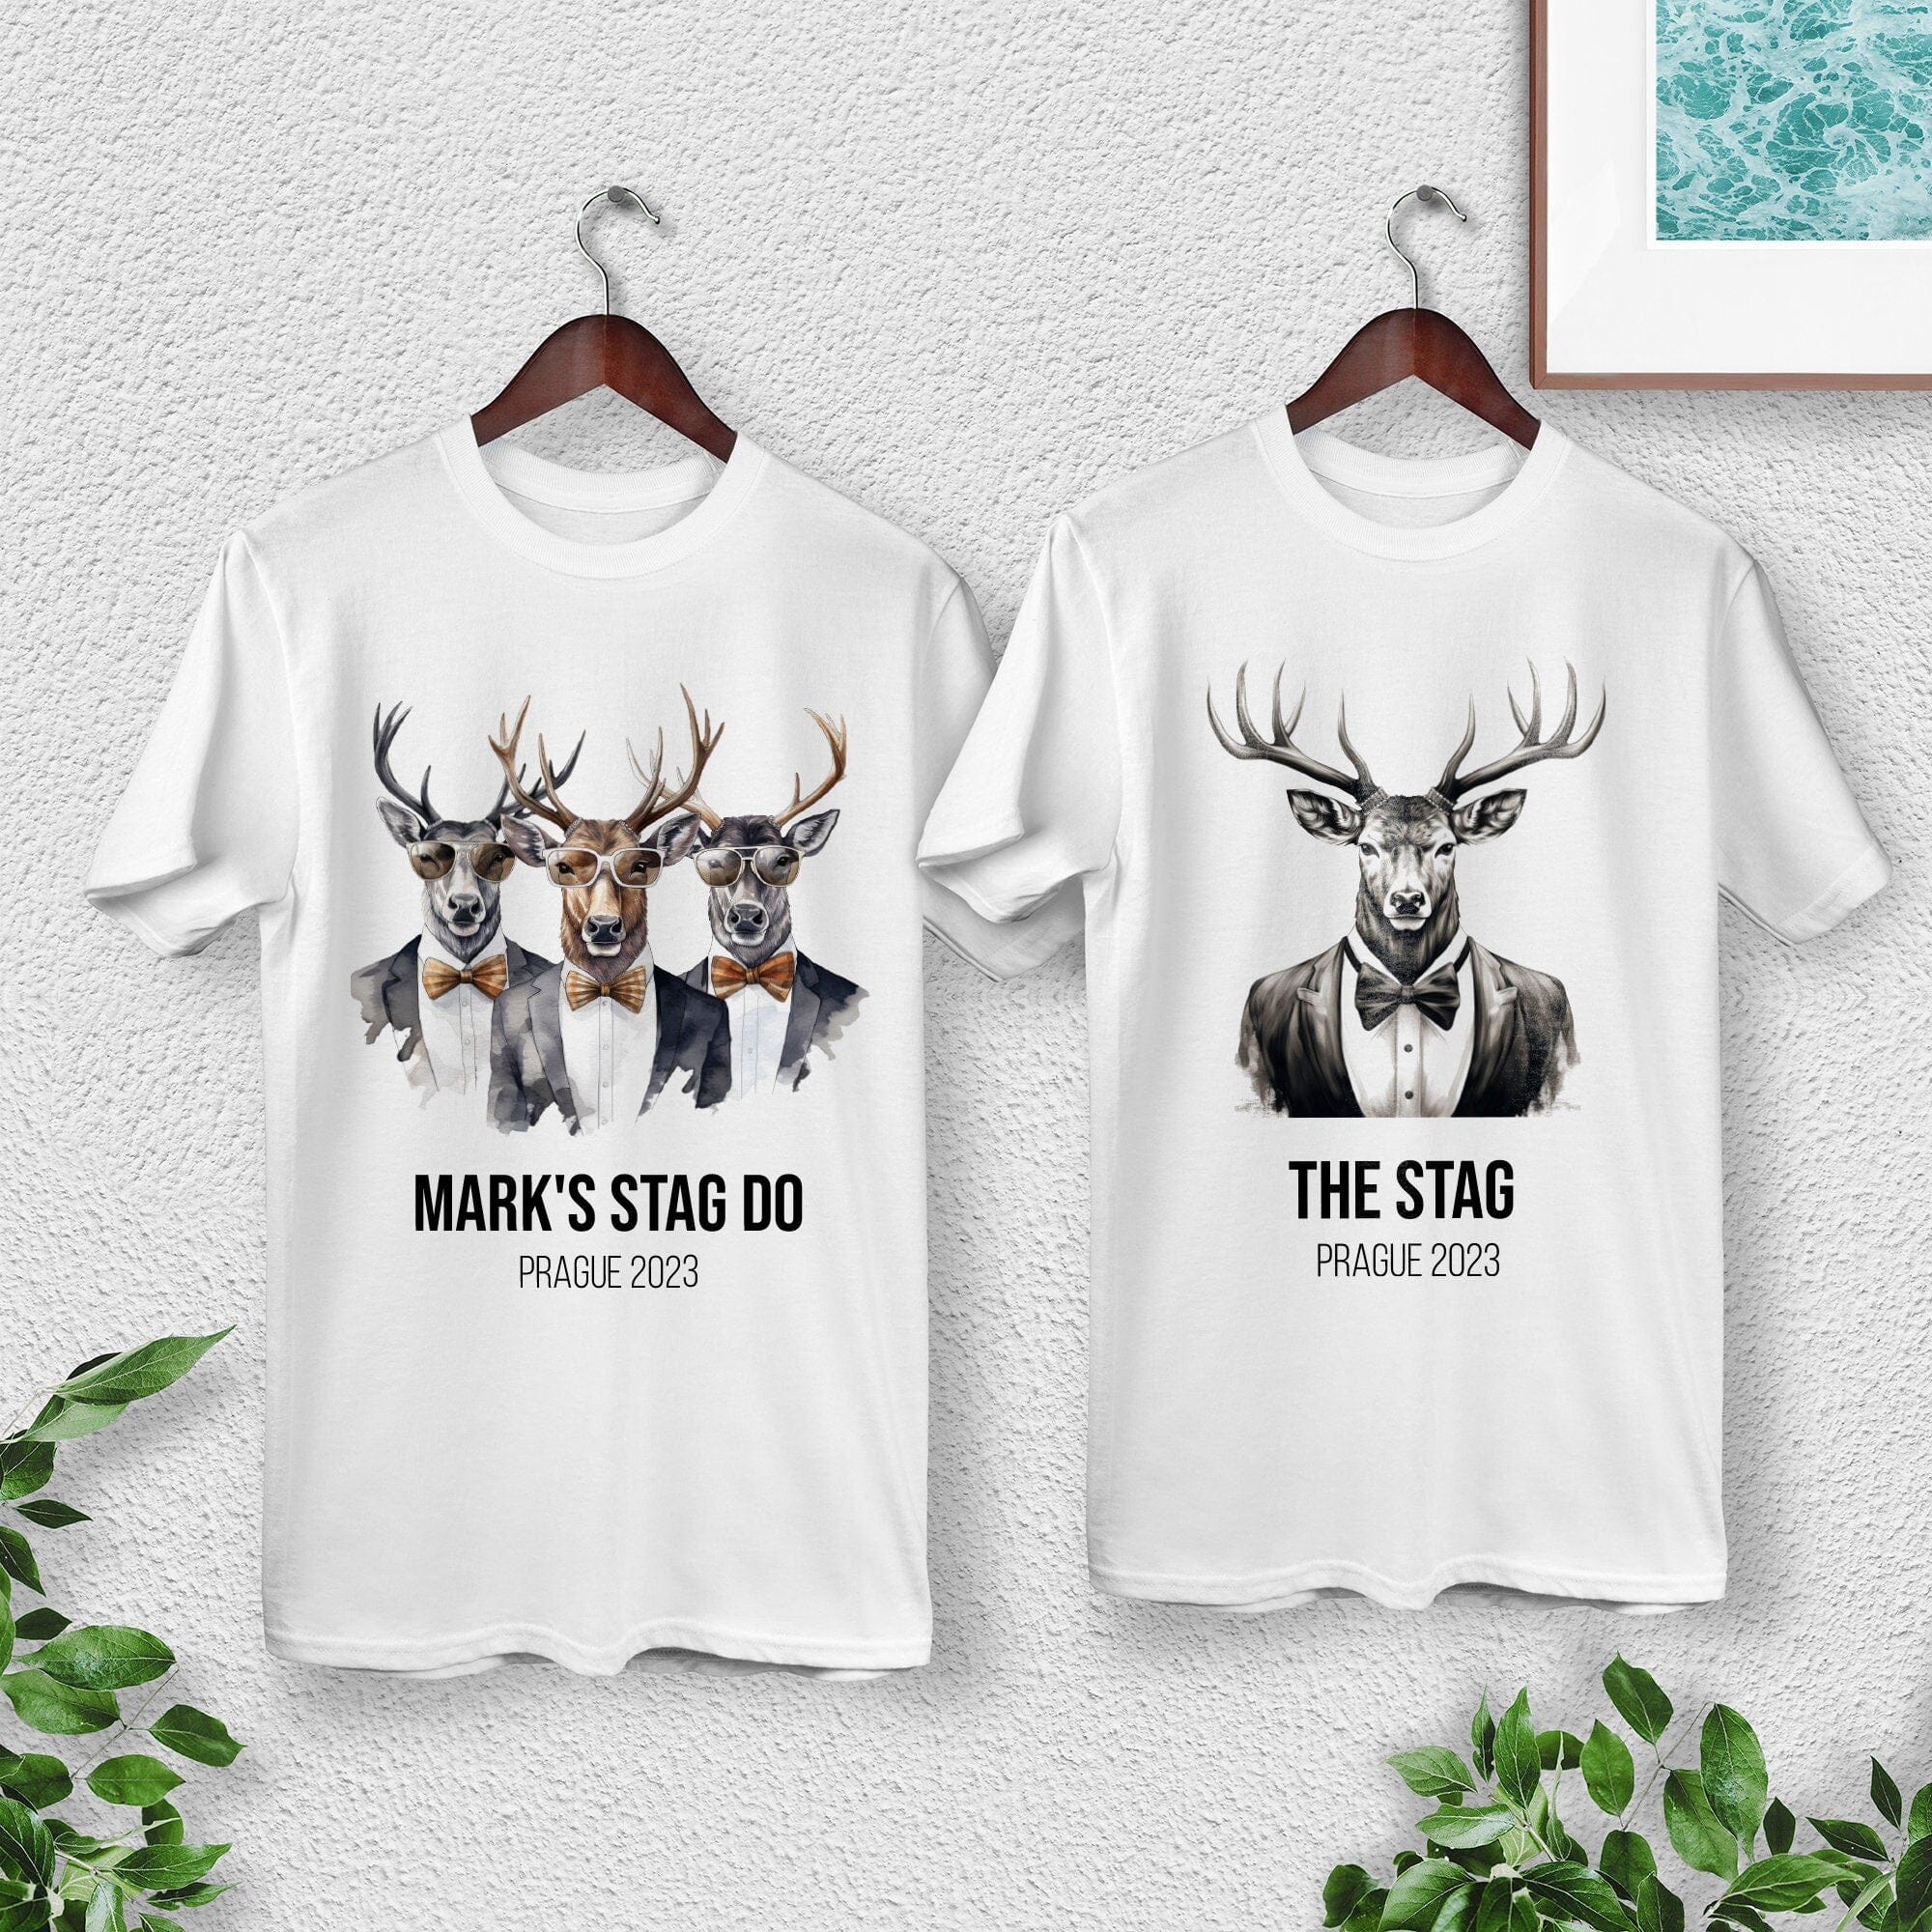 The Stag And Stag's Team T-Shirt, Groom Groomsman Gift Funny Men's Stag Night Tee Stag Do Honeymoon